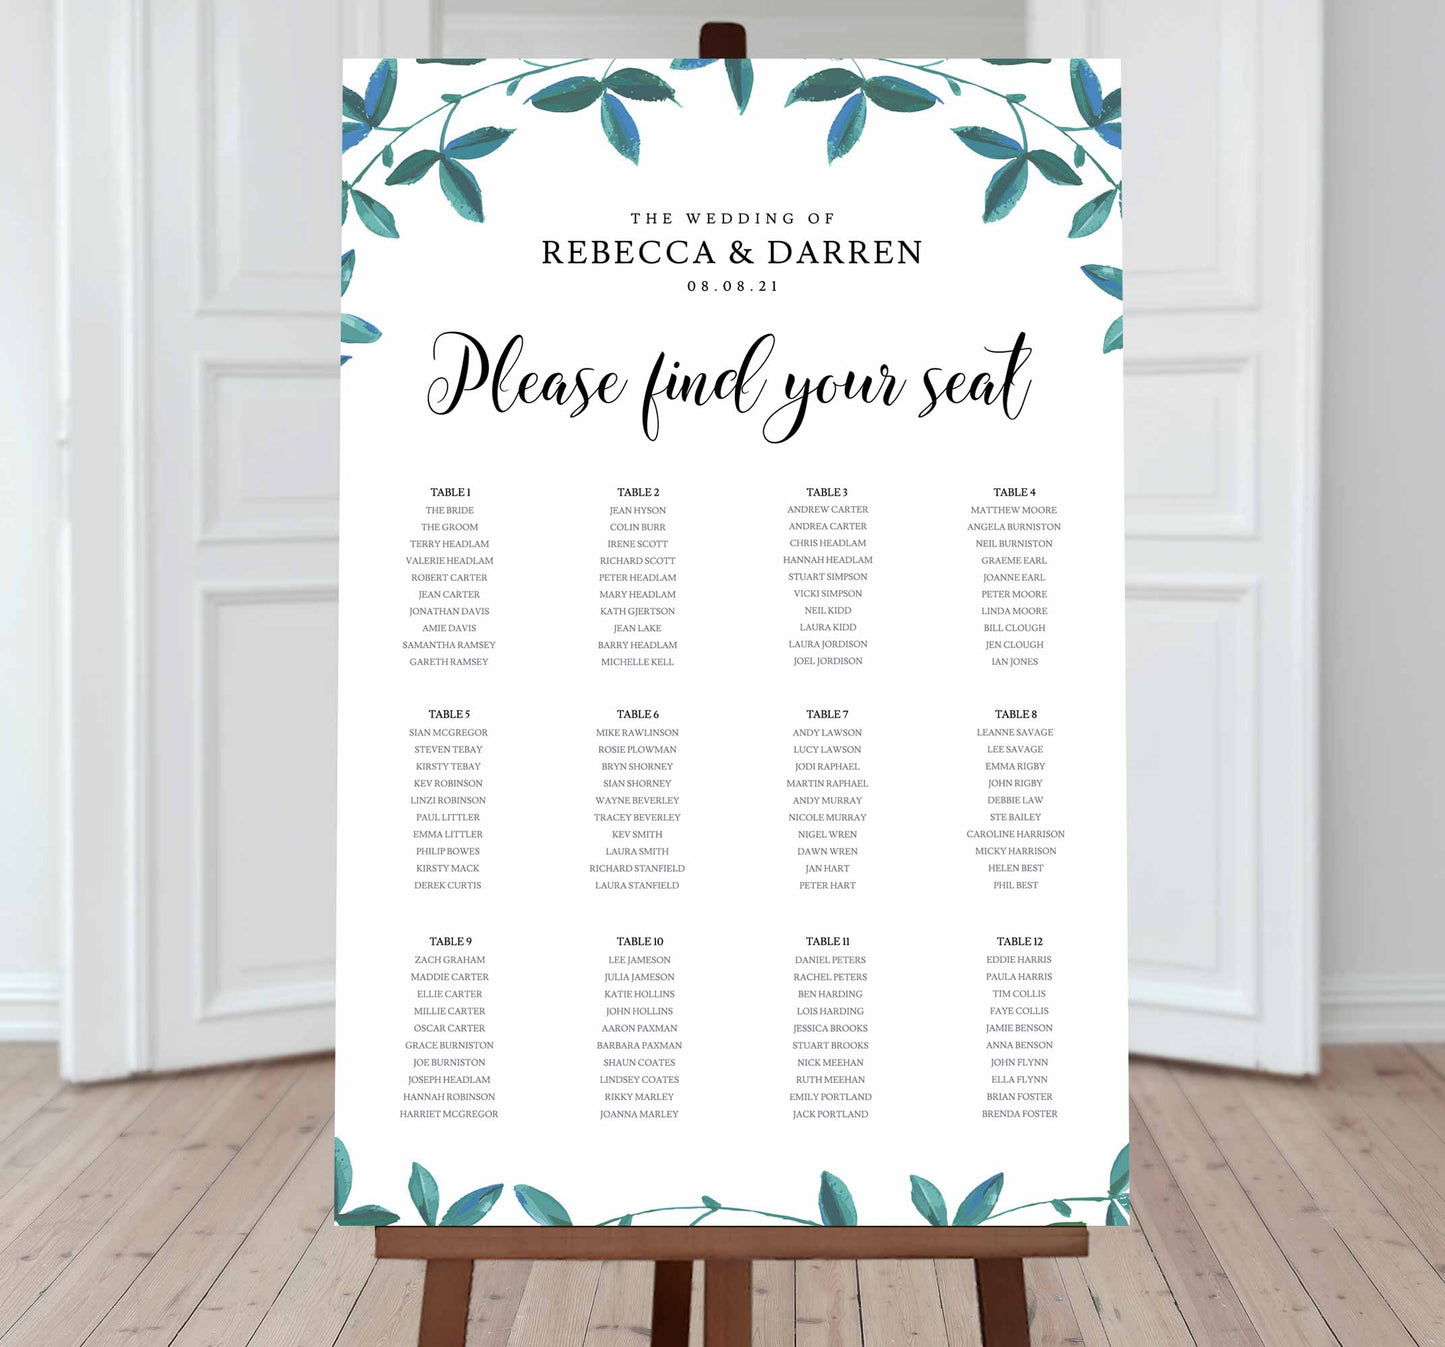 wedding seating chart with bride and grooms name, wedding date, please find your seat with table numbers and guest names